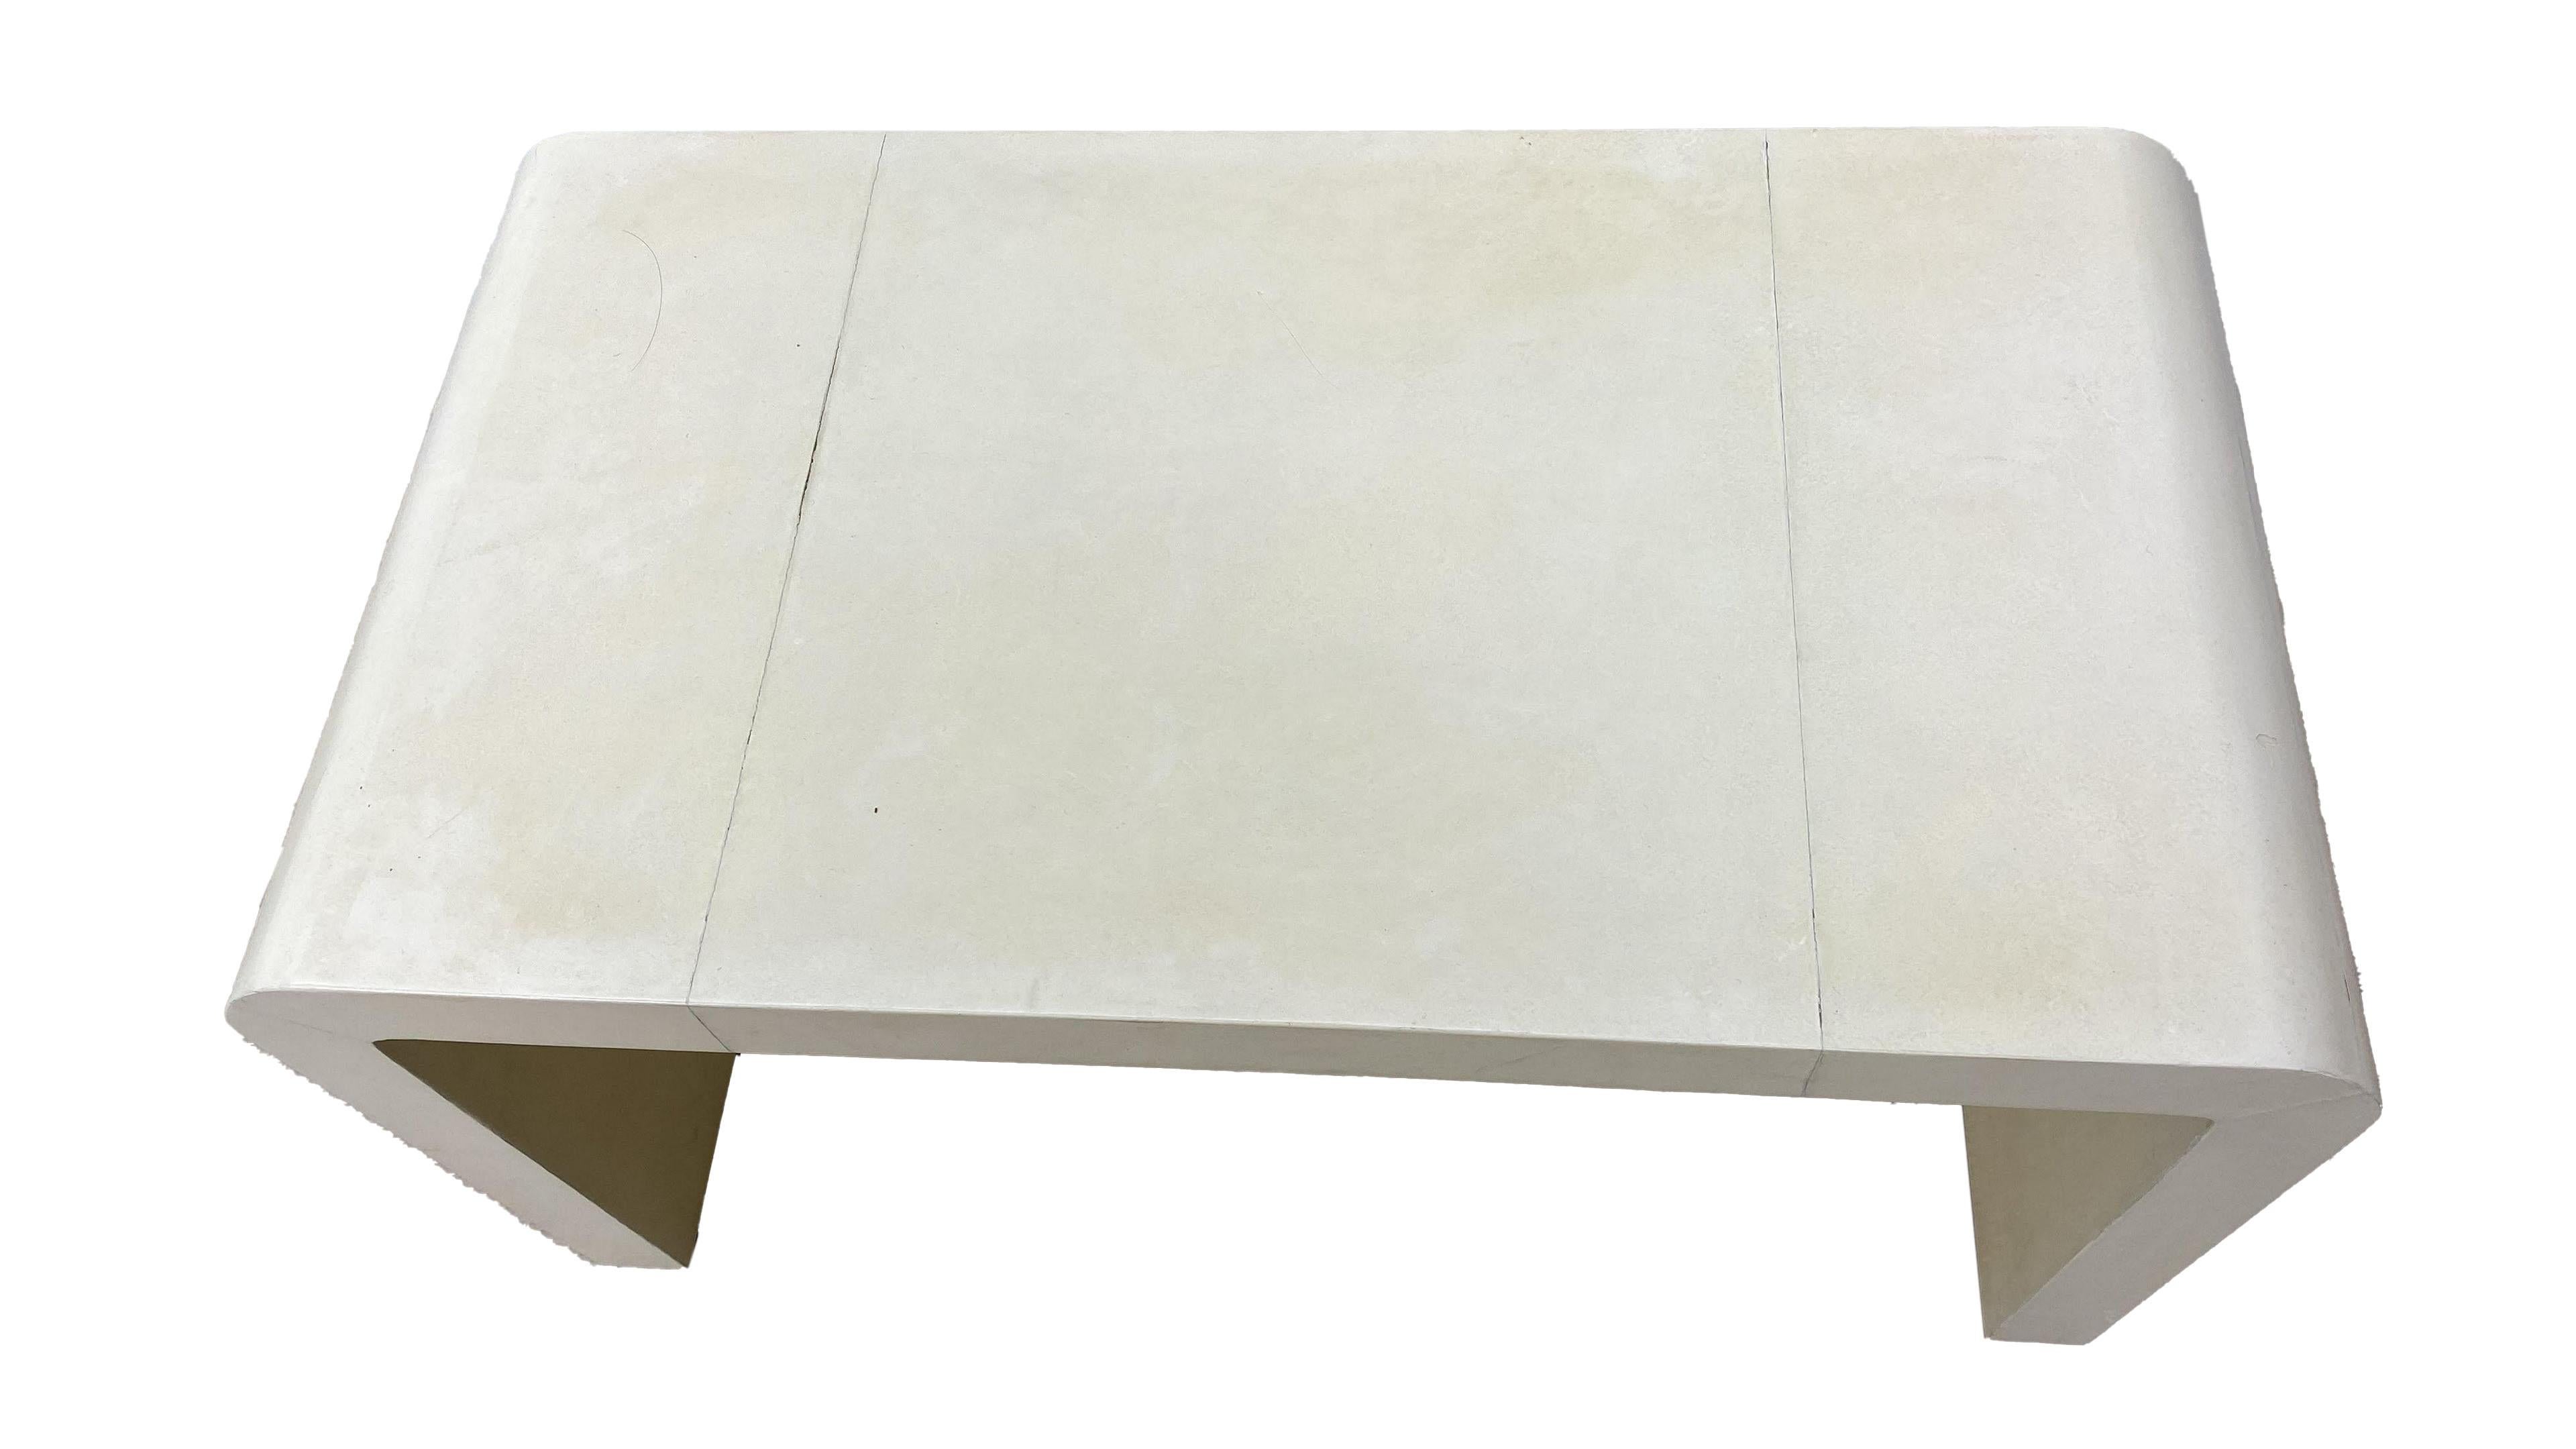 Jean-Michel Frank style waterfall coffee table not signed, but could be an original. It is covered in original goatskin parchment. Beautiful addition to any decor.